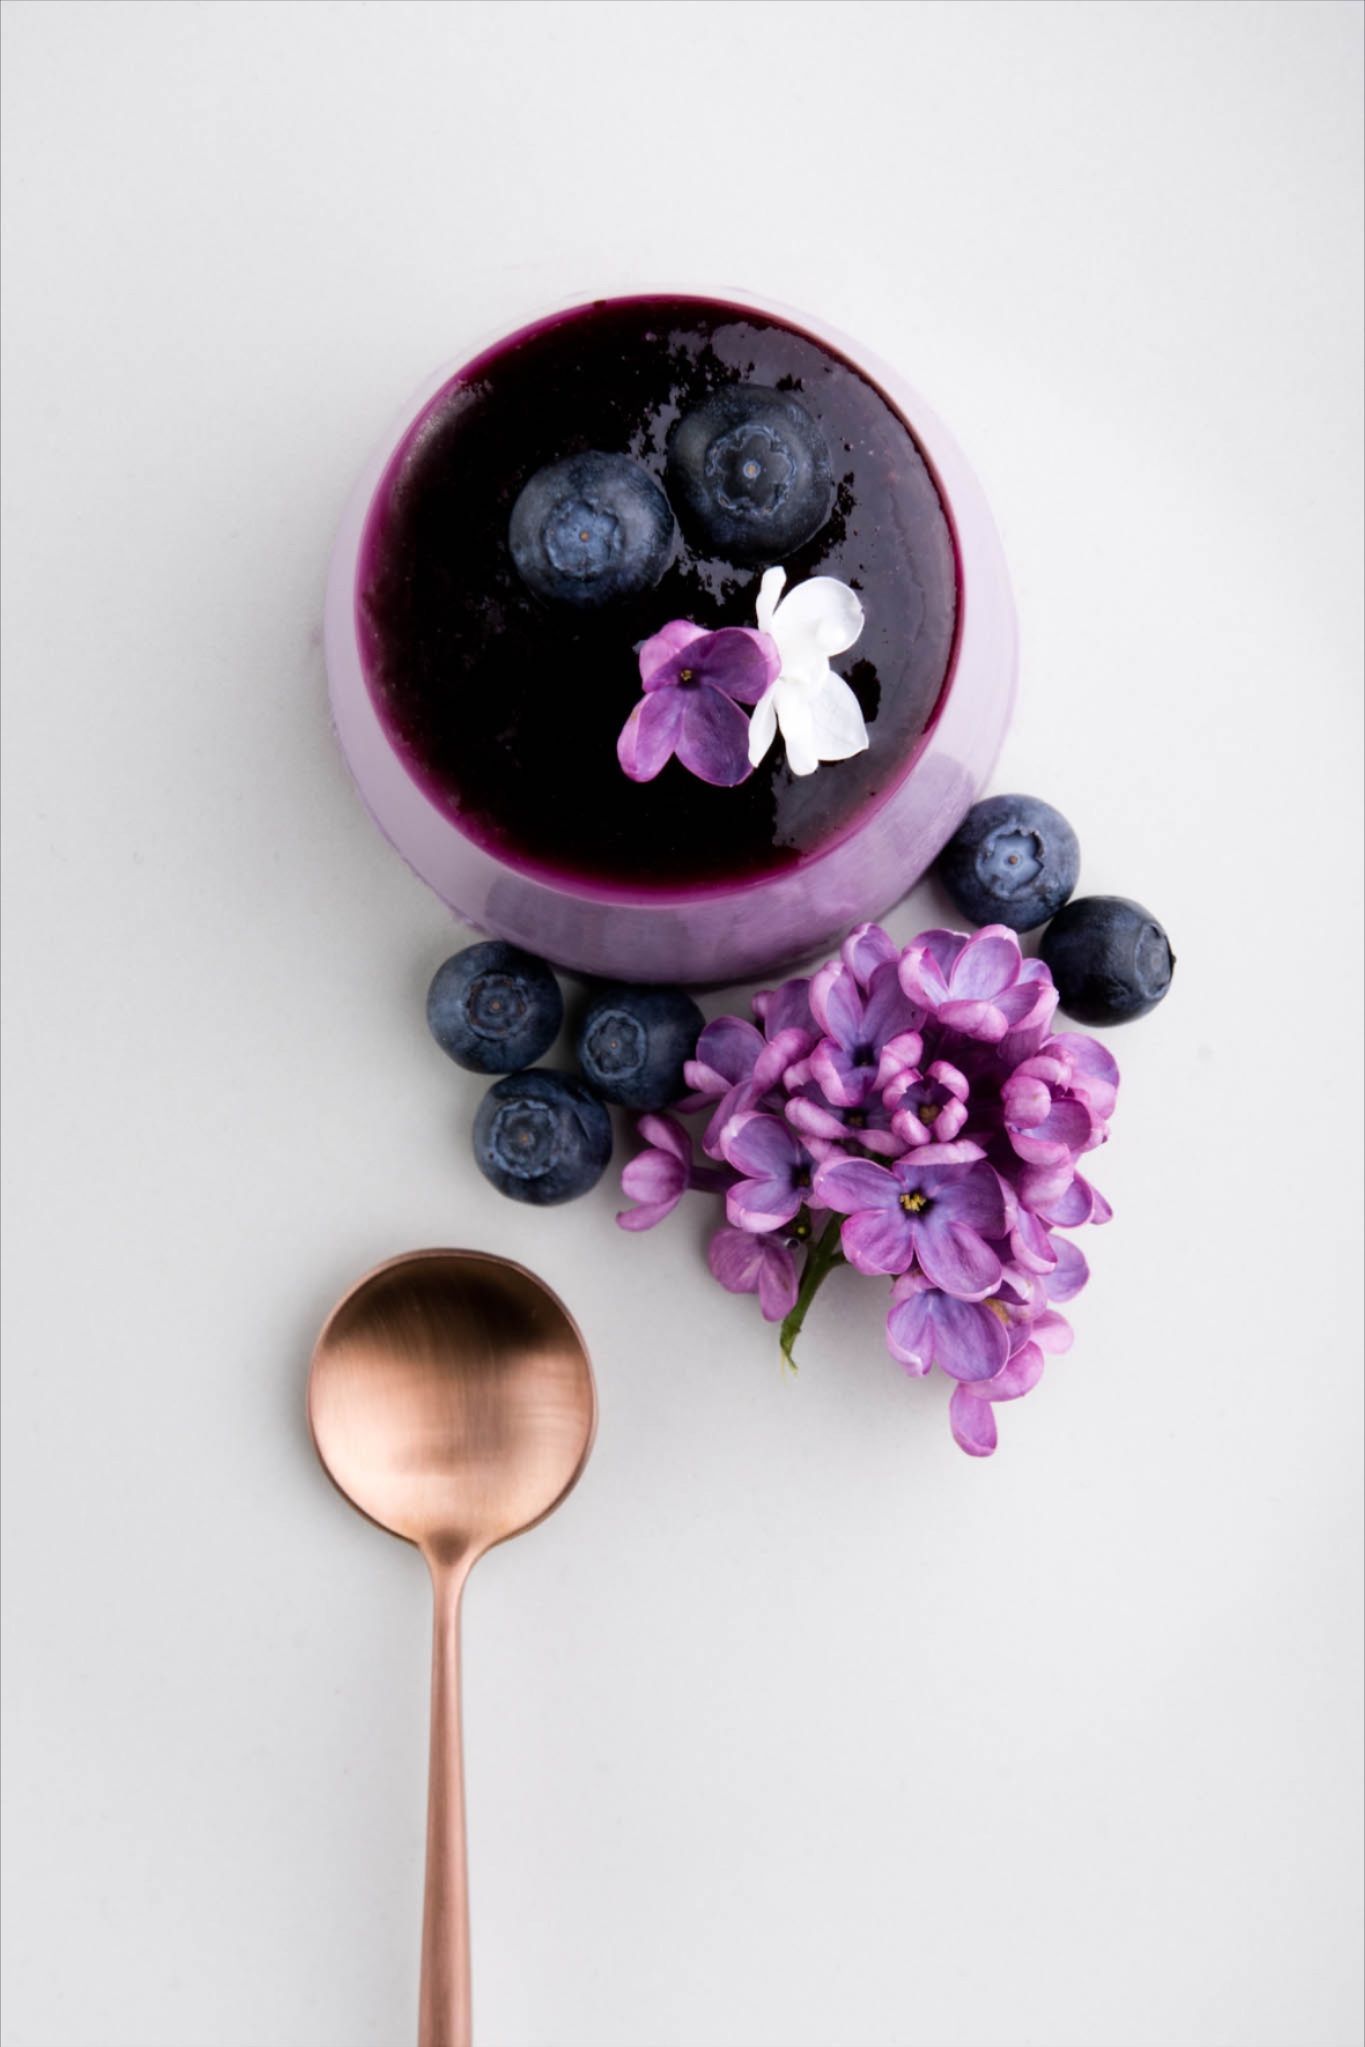 ... blueberry and lilac syrup panna cotta | food art -   16 blueberry desserts Photography ideas